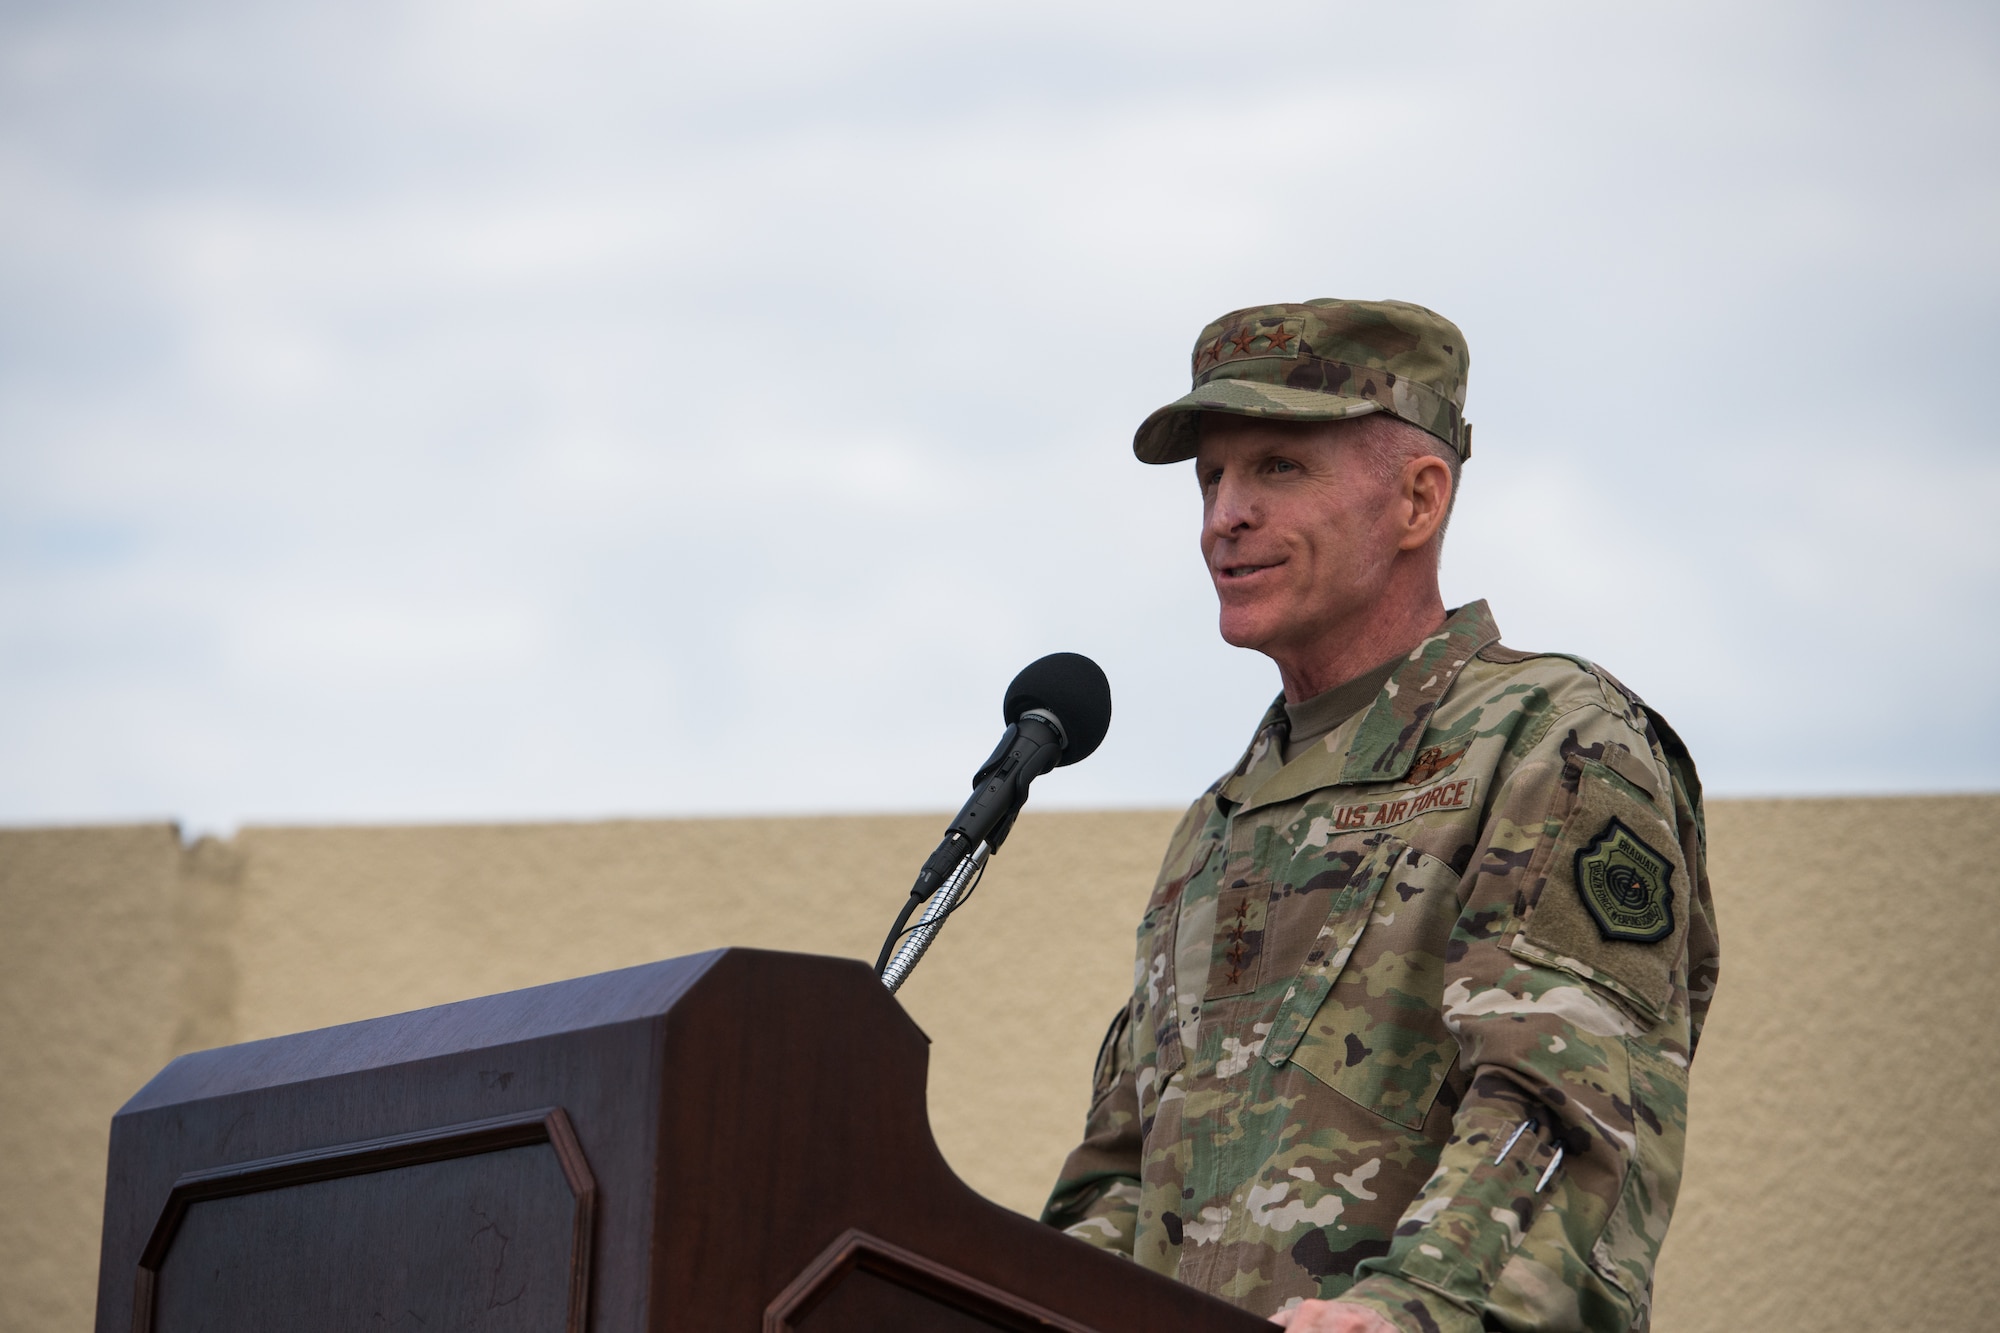 General Stephen W. Wilson, Vice Chief of Staff of United States Air Force, provides remarks during the Joint Base San Antonio Annex renaming ceremony, March 4, 2020, at Joint Base San Antonio-Chapman Annex, Texas. Joint Base San Antonio-Annex, home of Special Warfare training, is renamed JBSA-Chapman Annex in honor of the service, heroism, and ultimate sacrifice of Master Sgt. John A. Chapman. Chapman was posthumously awarded the Medal of Honor for his action in Takur Ghar, Afghanistan. (U.S. Air Force photo by Sarayuth Pinthong)